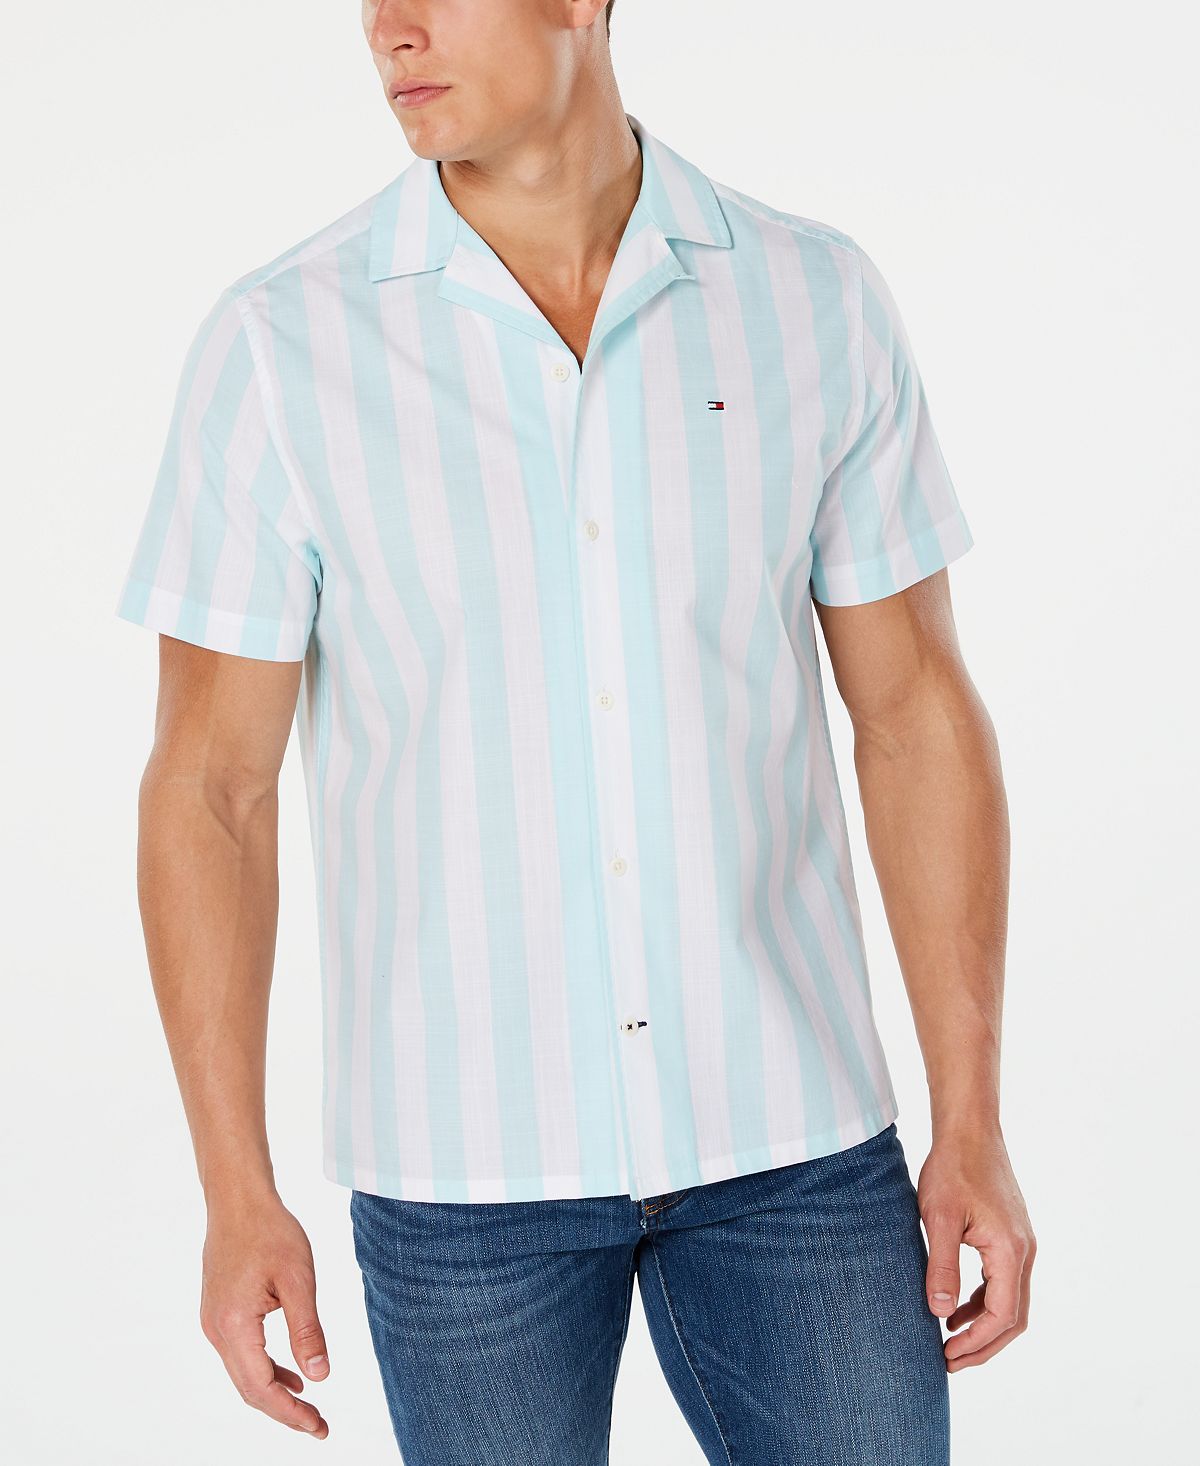 Tommy Hilfiger Abner Stripe Camp Collar Shirt Limpet Shell – CheapUndies